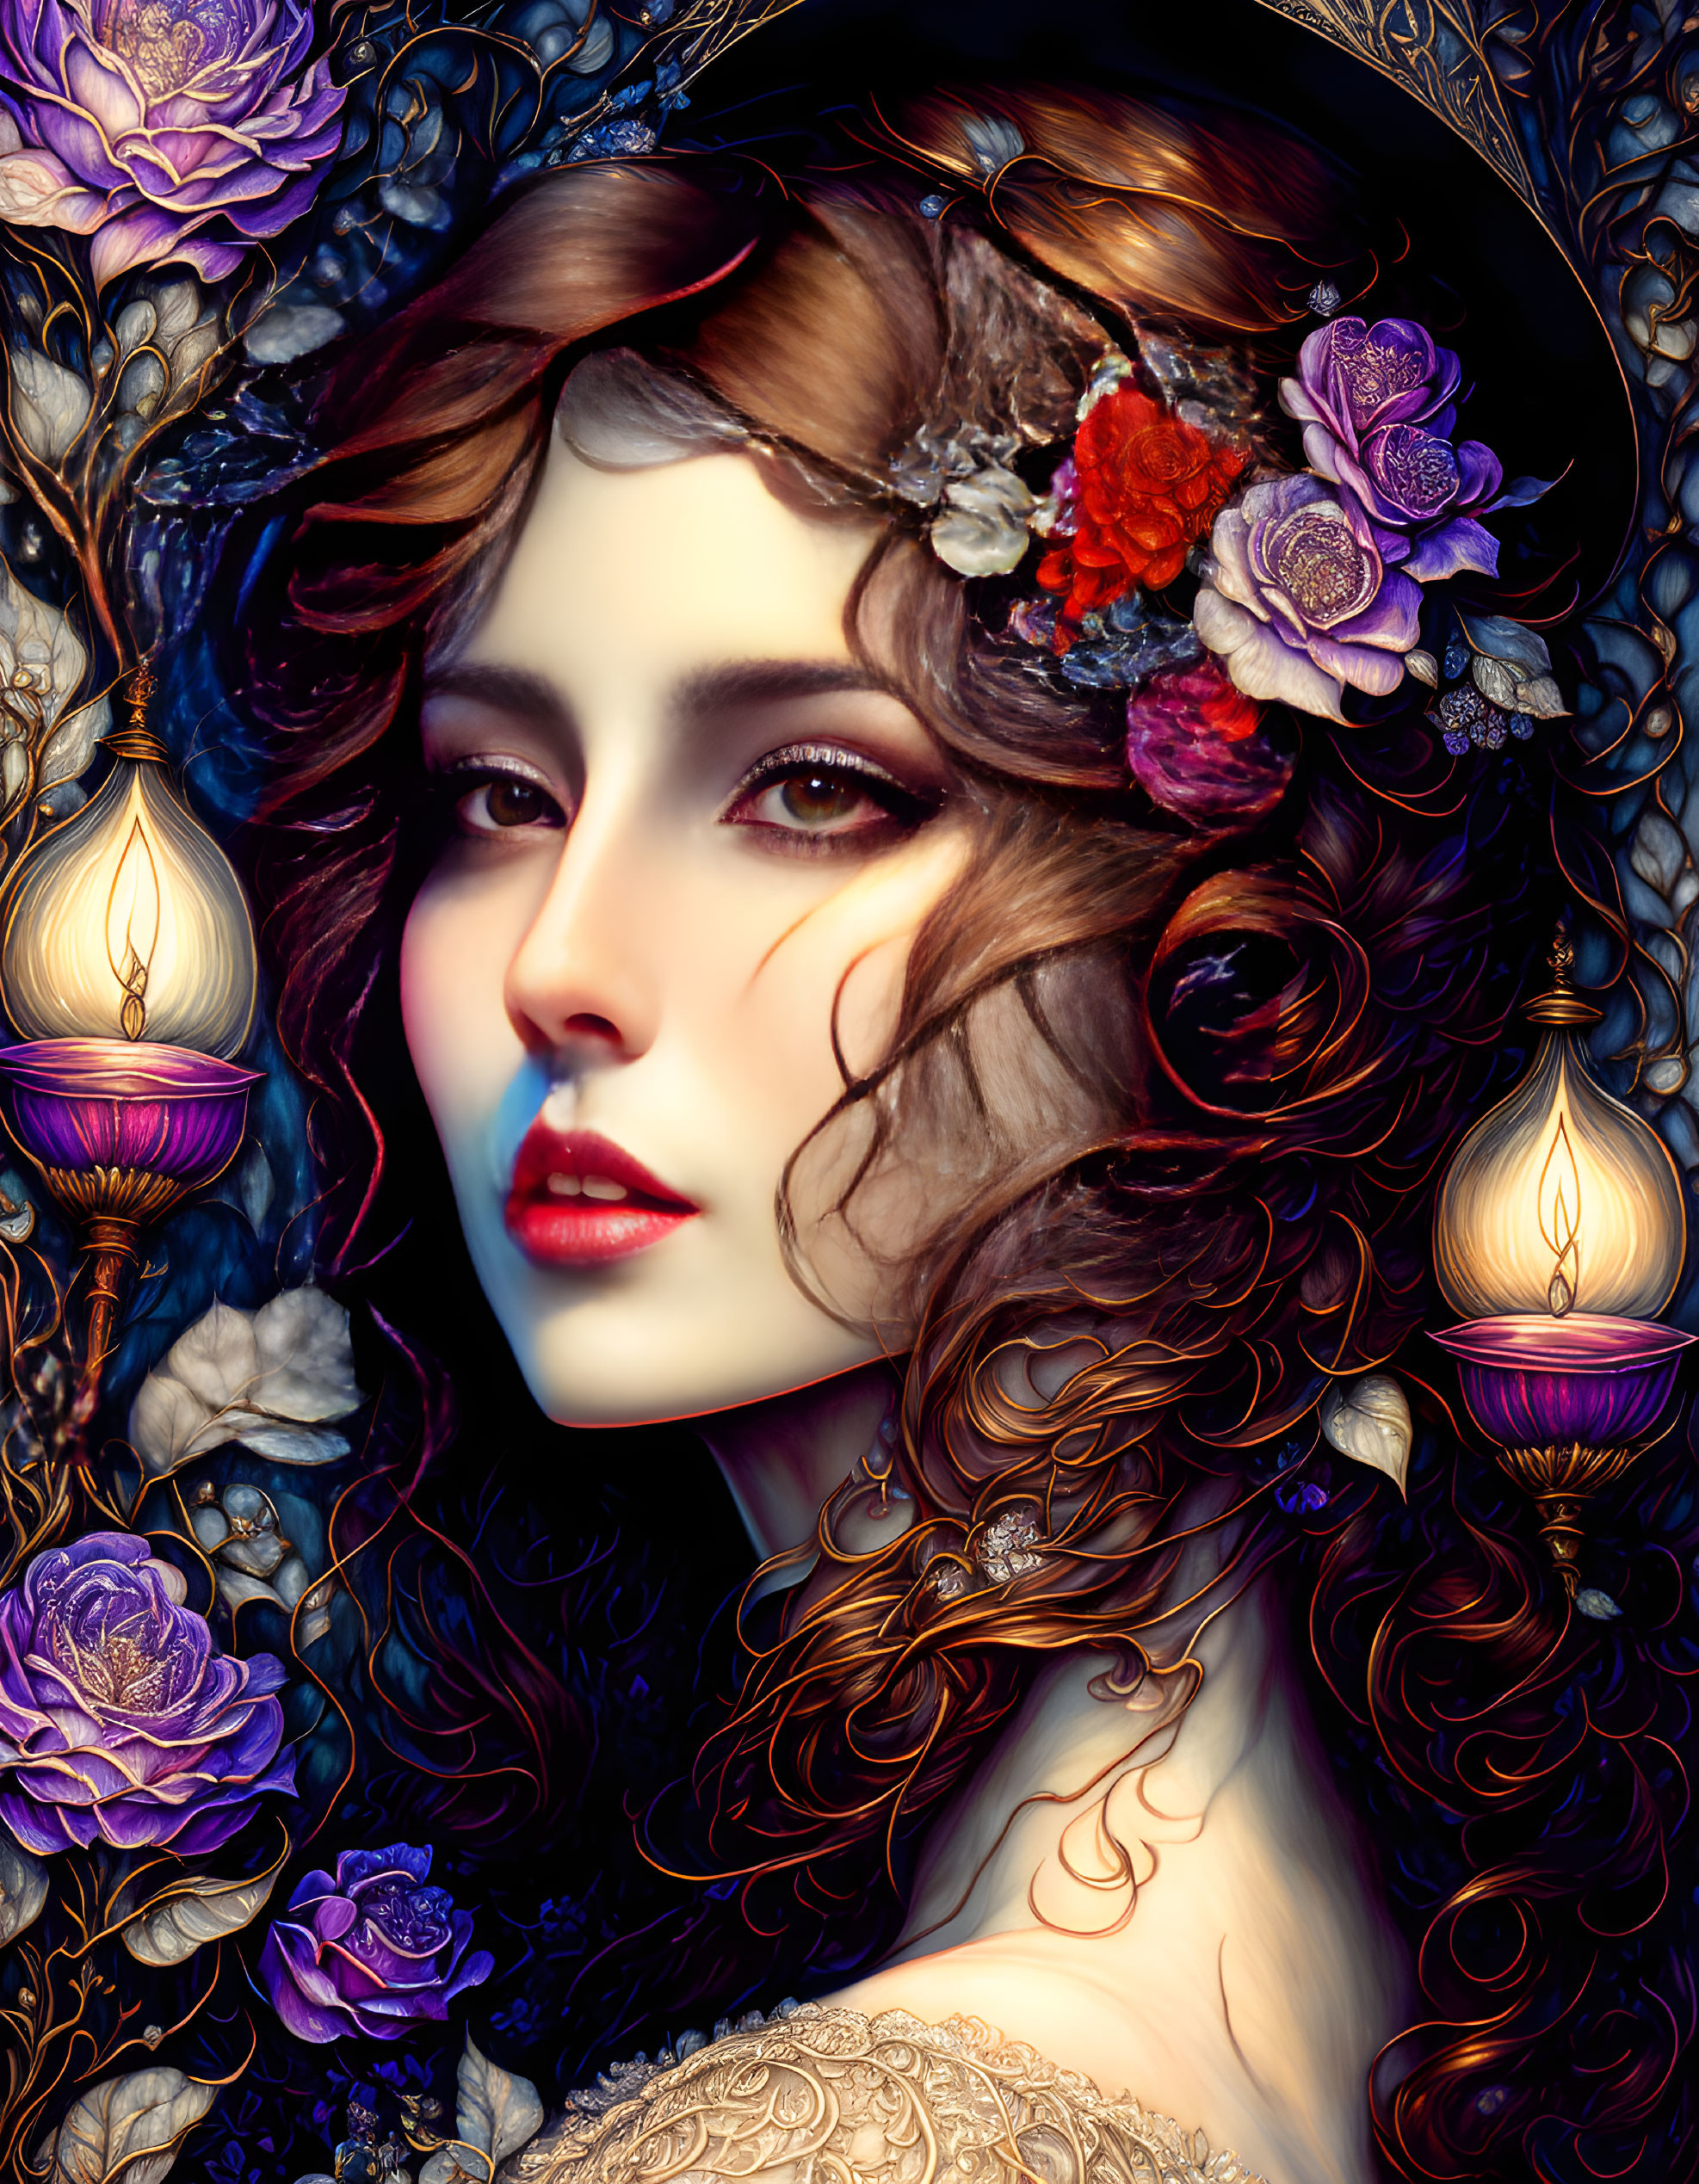 Detailed portrait of a woman with wavy hair and flowers, surrounded by purple roses and lanterns